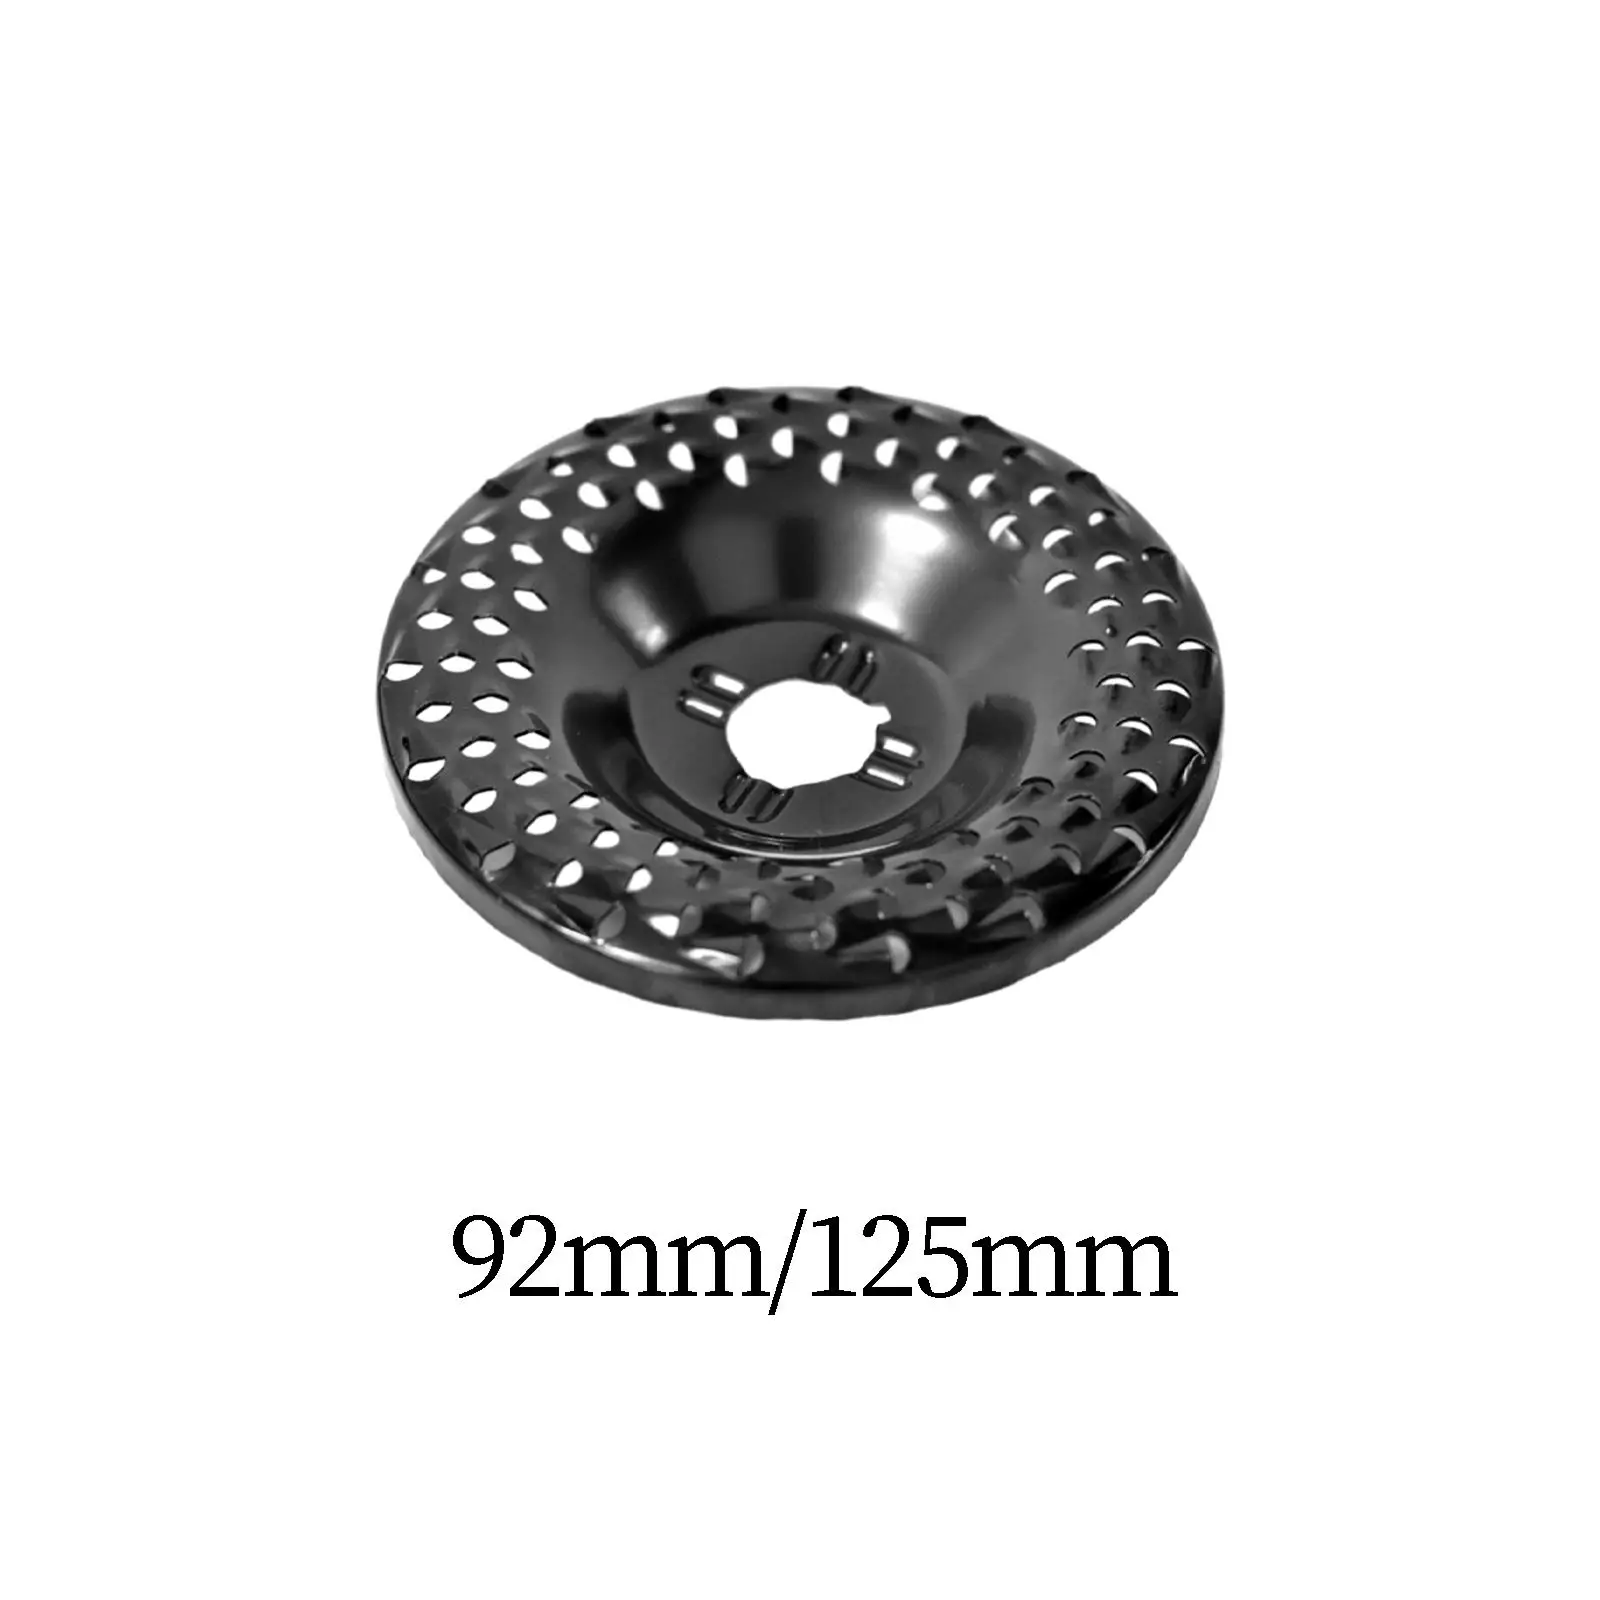 Grinder Wheel Disc Wood Trimming Spare Parts 92mm/125mm Surface Grinding Portable Woodworking Tool Smoothing Angle Grinder Disc